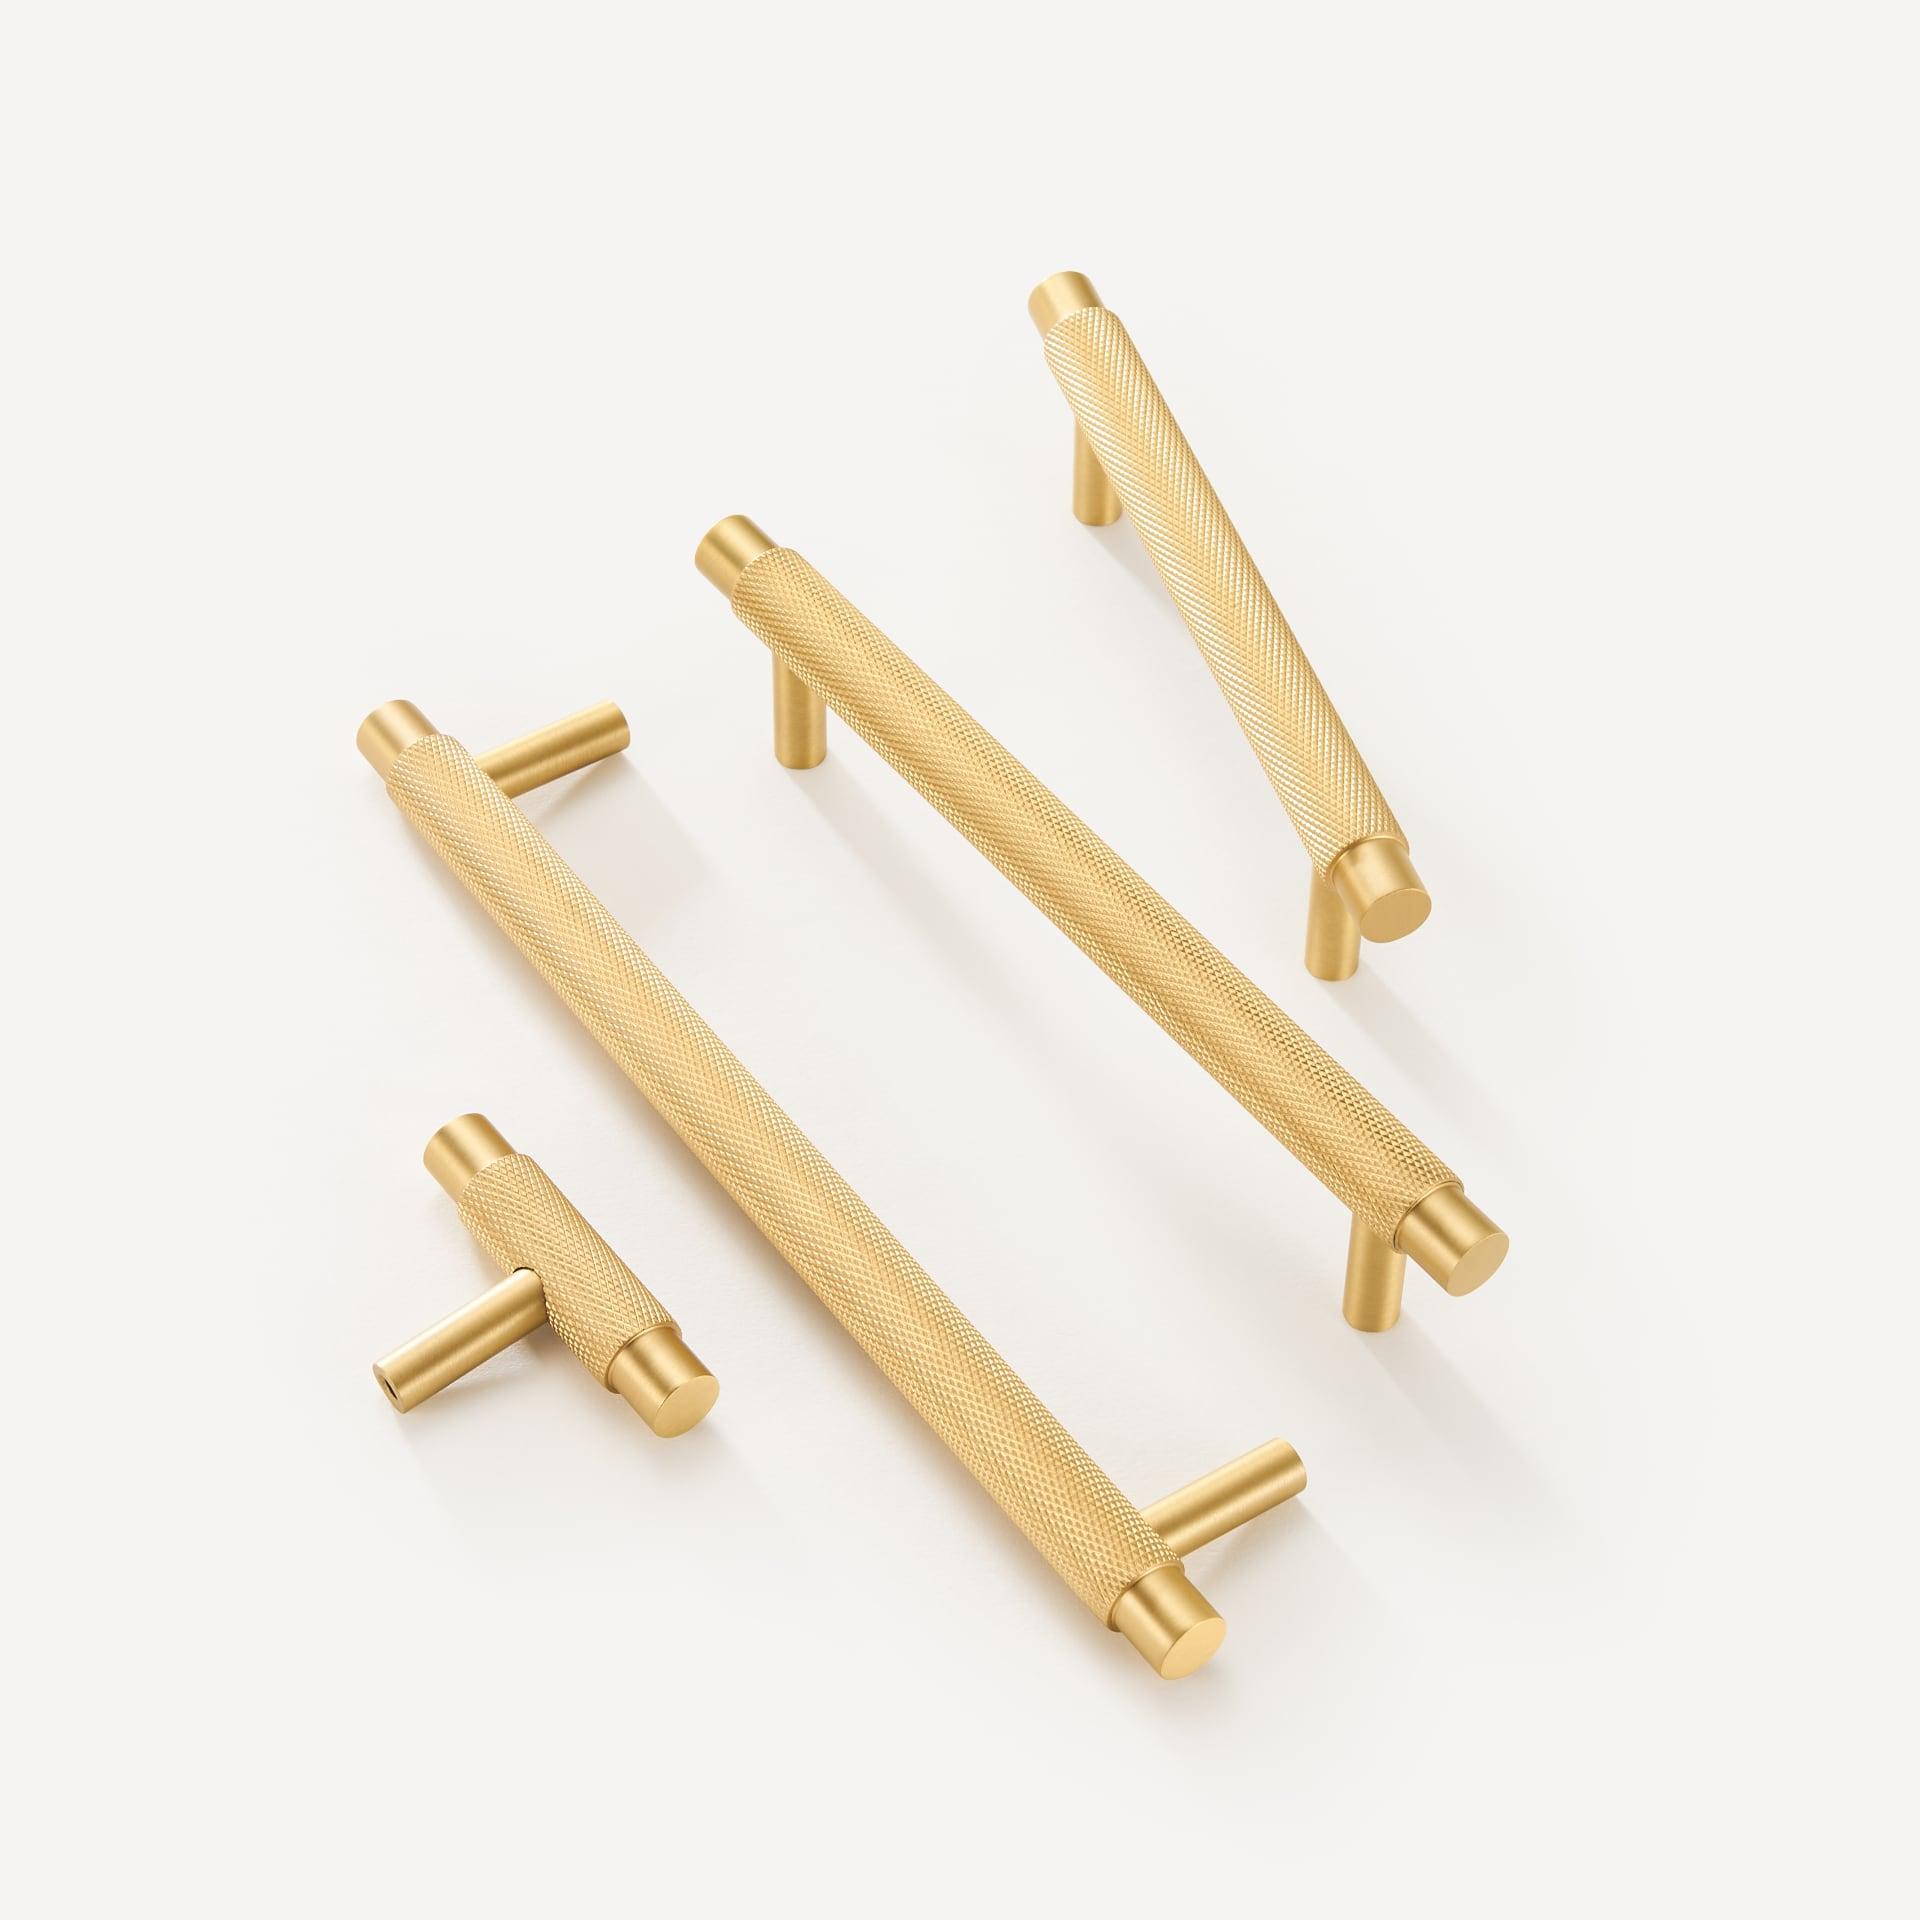 BURGAS / SOLID BRASS HANDLES / KNURLED - Handle Shop Couture 